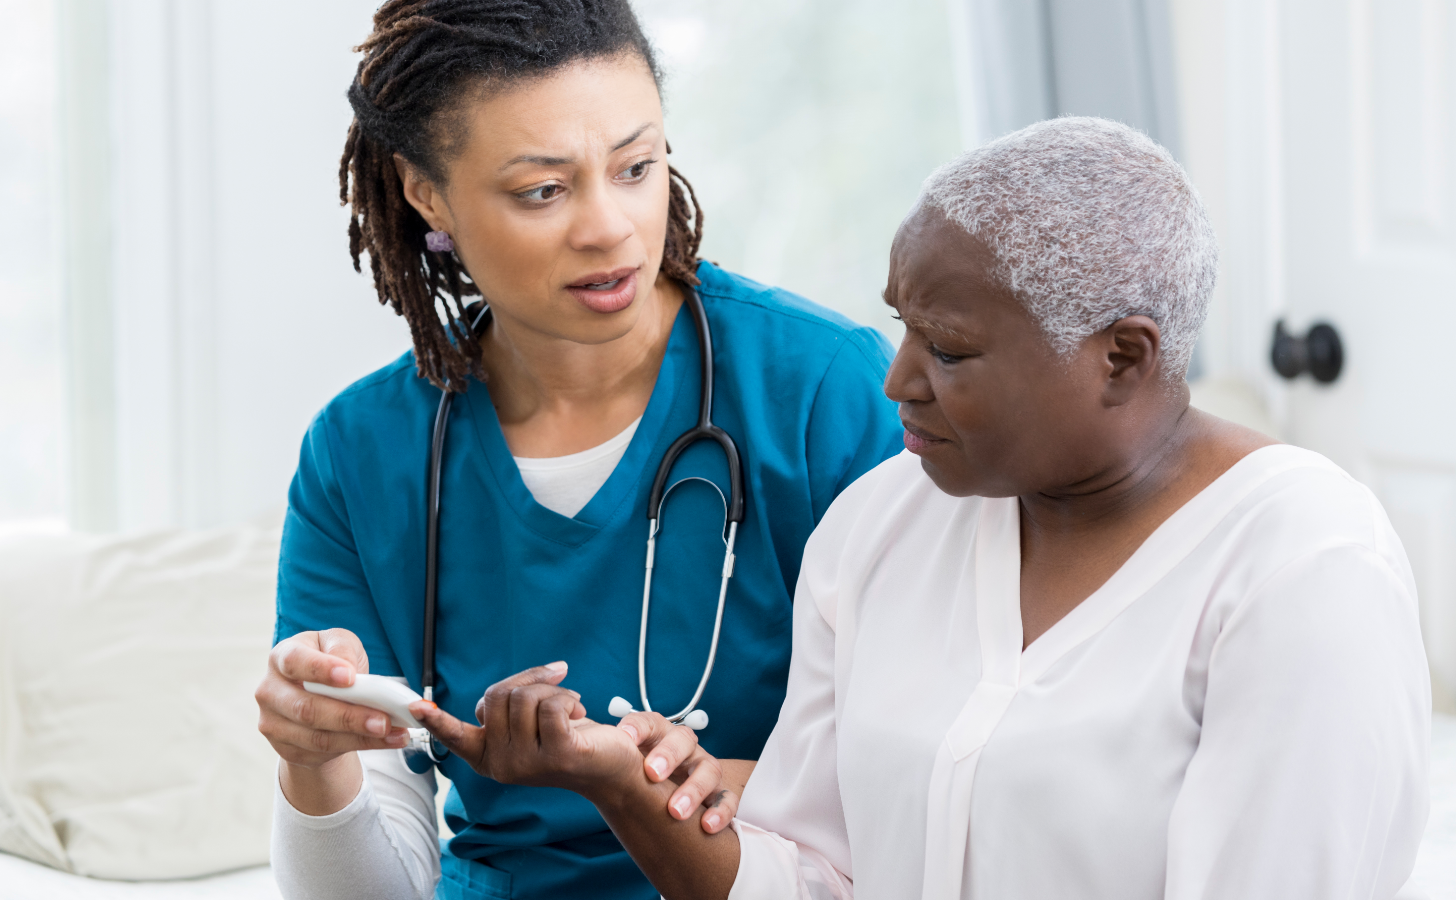 Provider speaking with a patient while placing a device on their finger